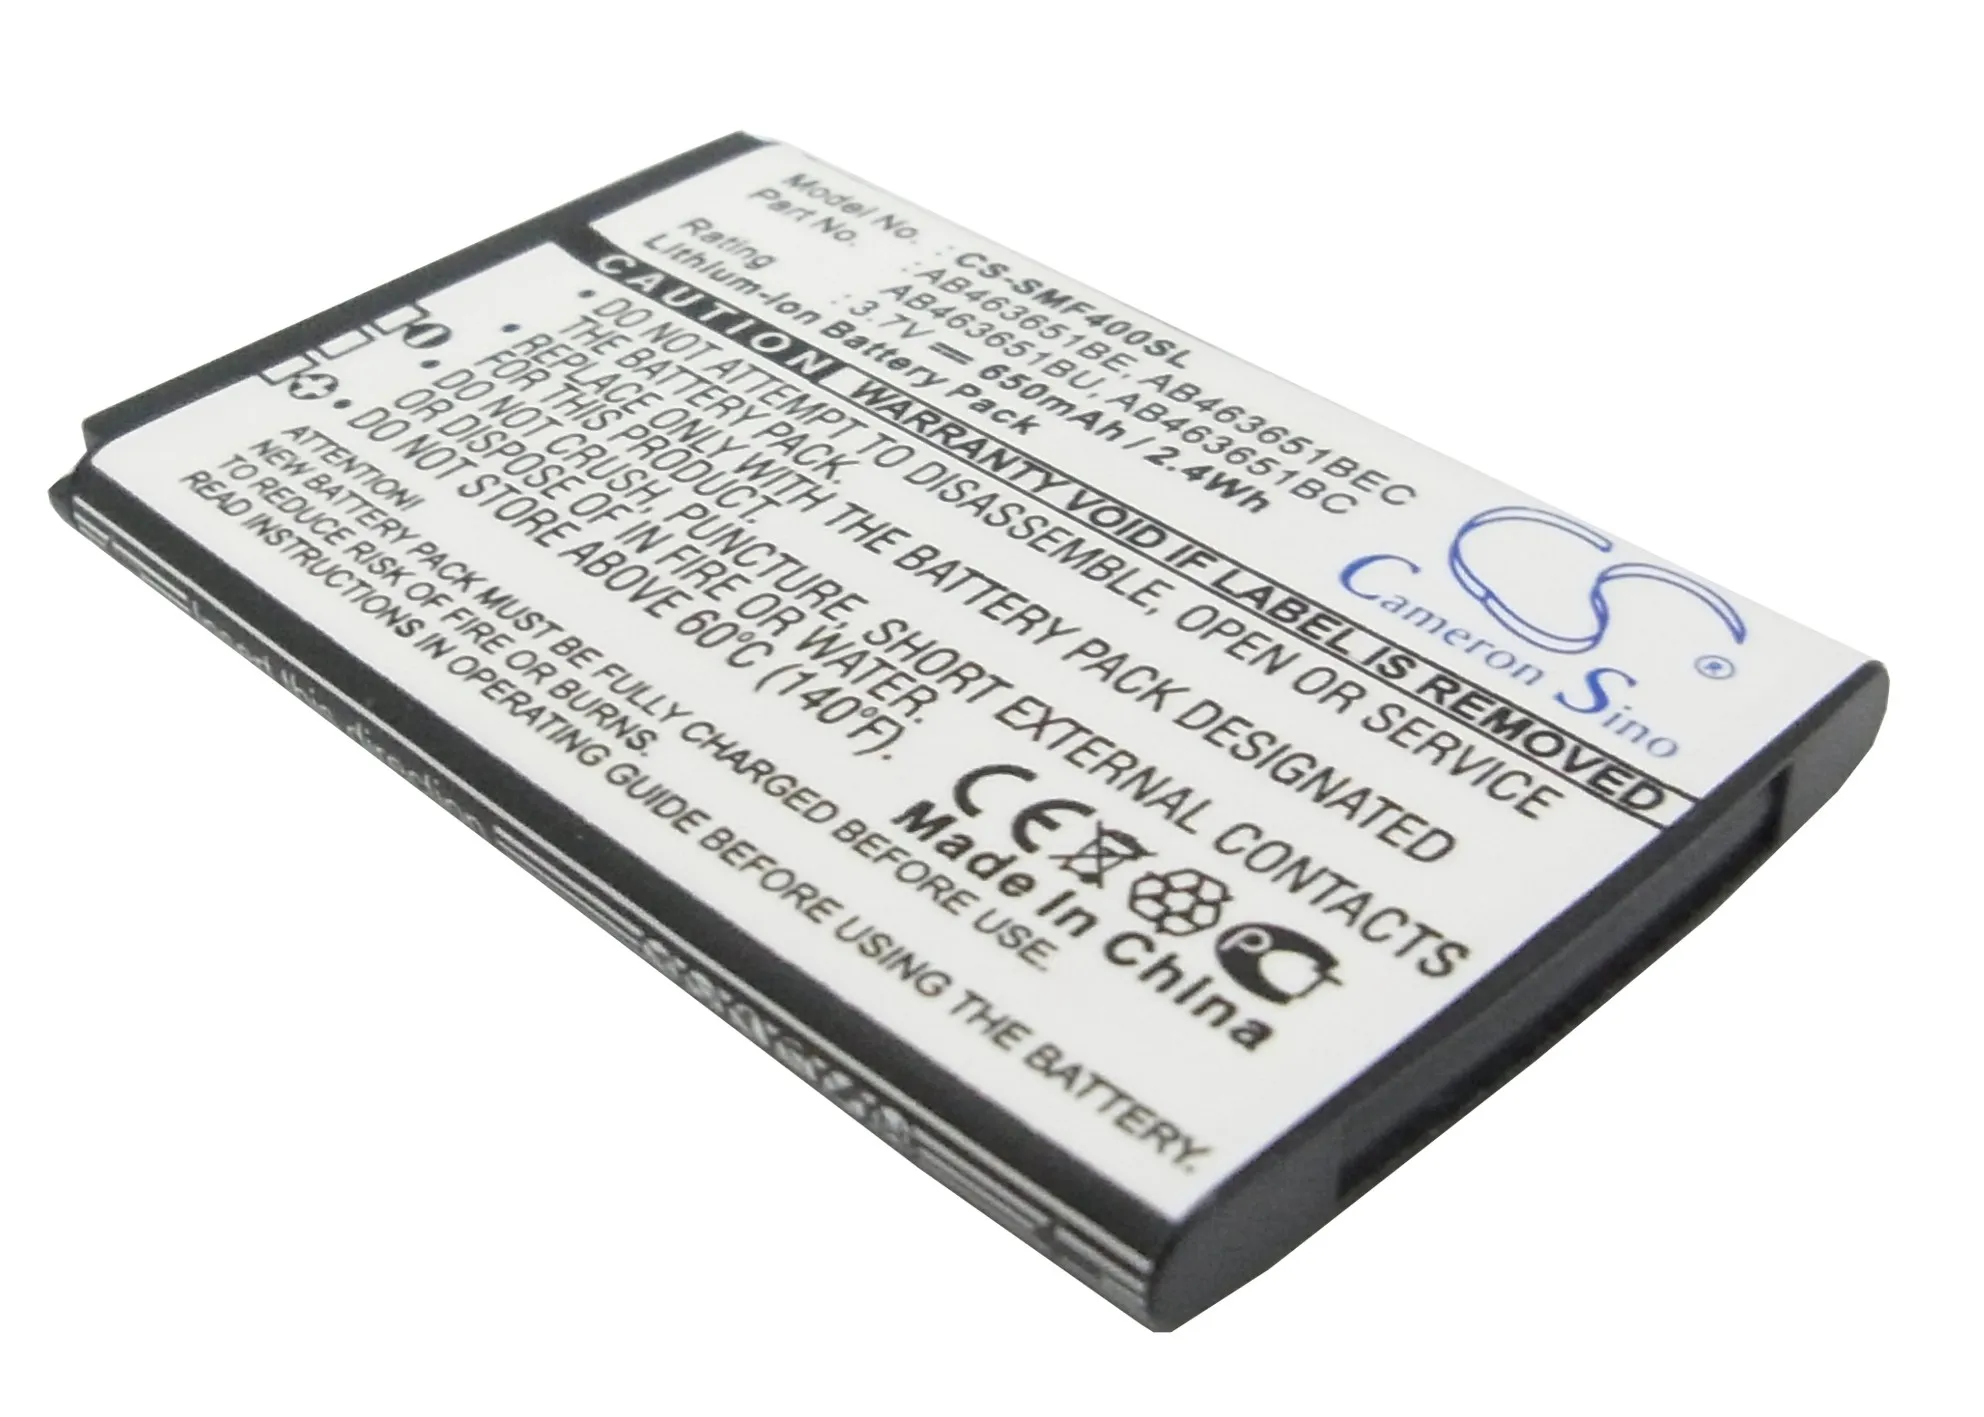 

cameron sino 750mAh battery for SAMSUNG Blade Chart Chat 322 Emporio Armani Genio Qwerty GH-J800 Glamour S7070 GT-B3410